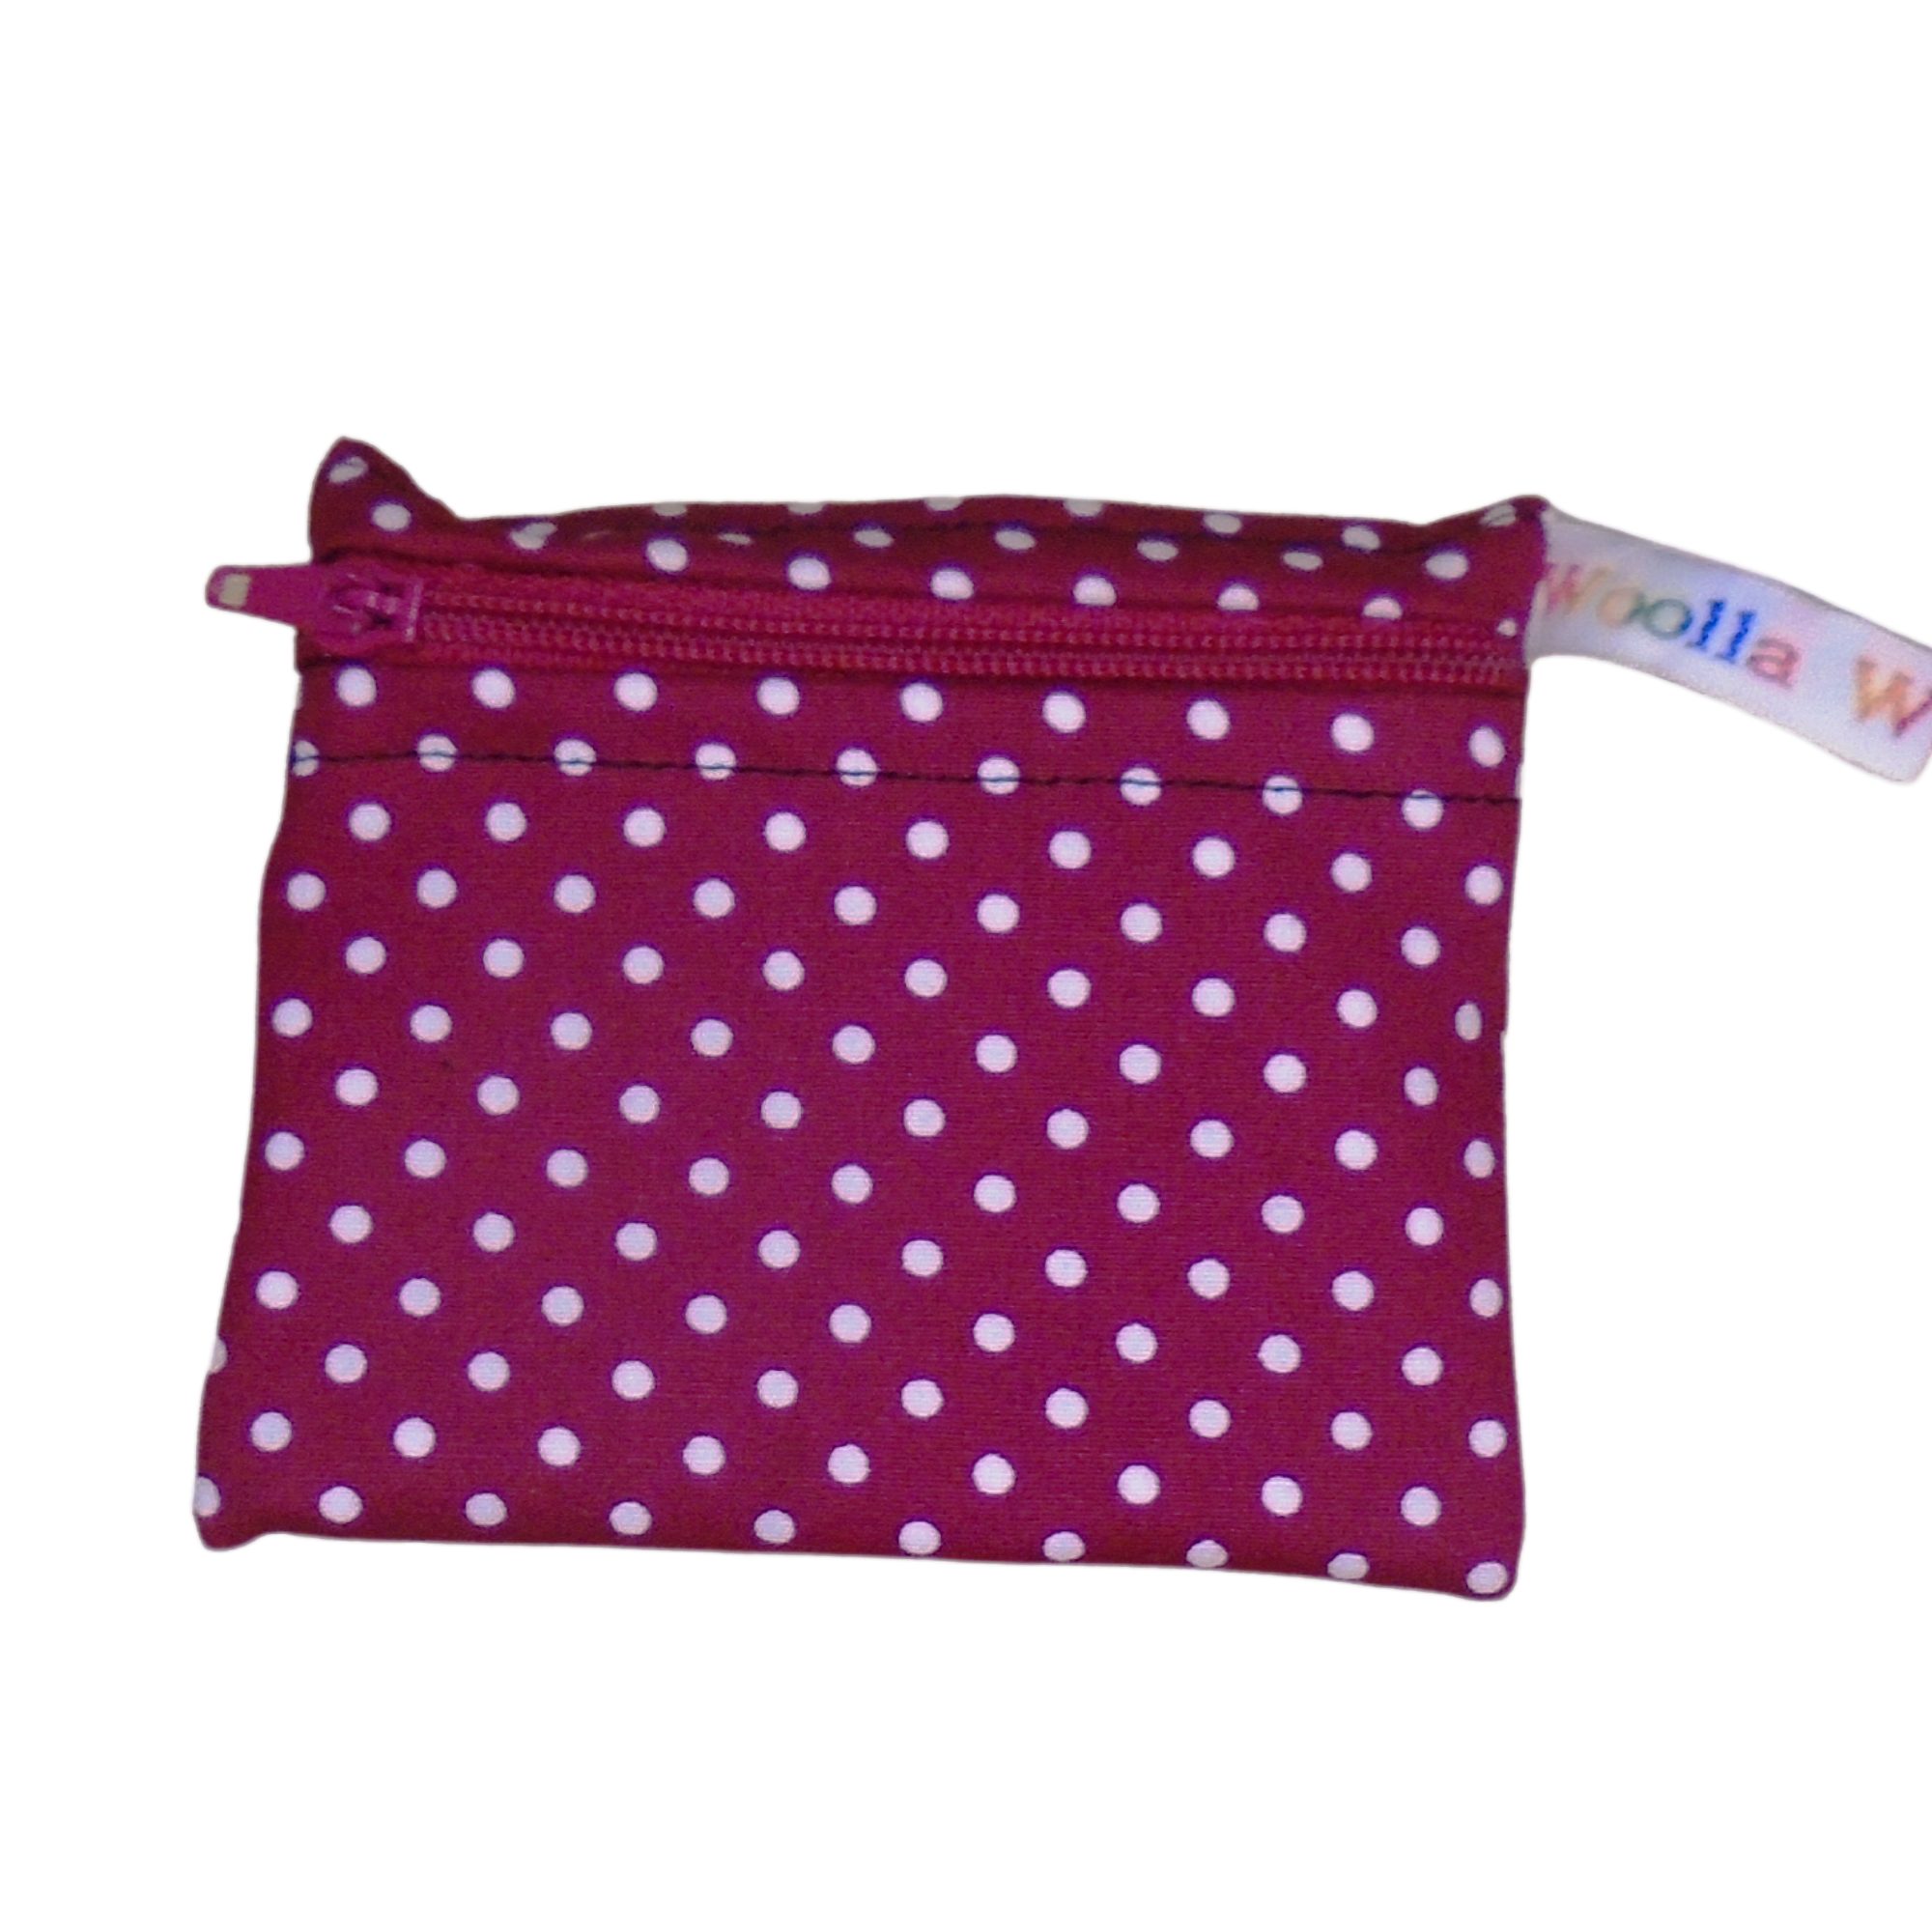 Wine Polka Dot - Pippins Poppins Pouch Snack Pouch, Coin Purse, Ear Bud Case